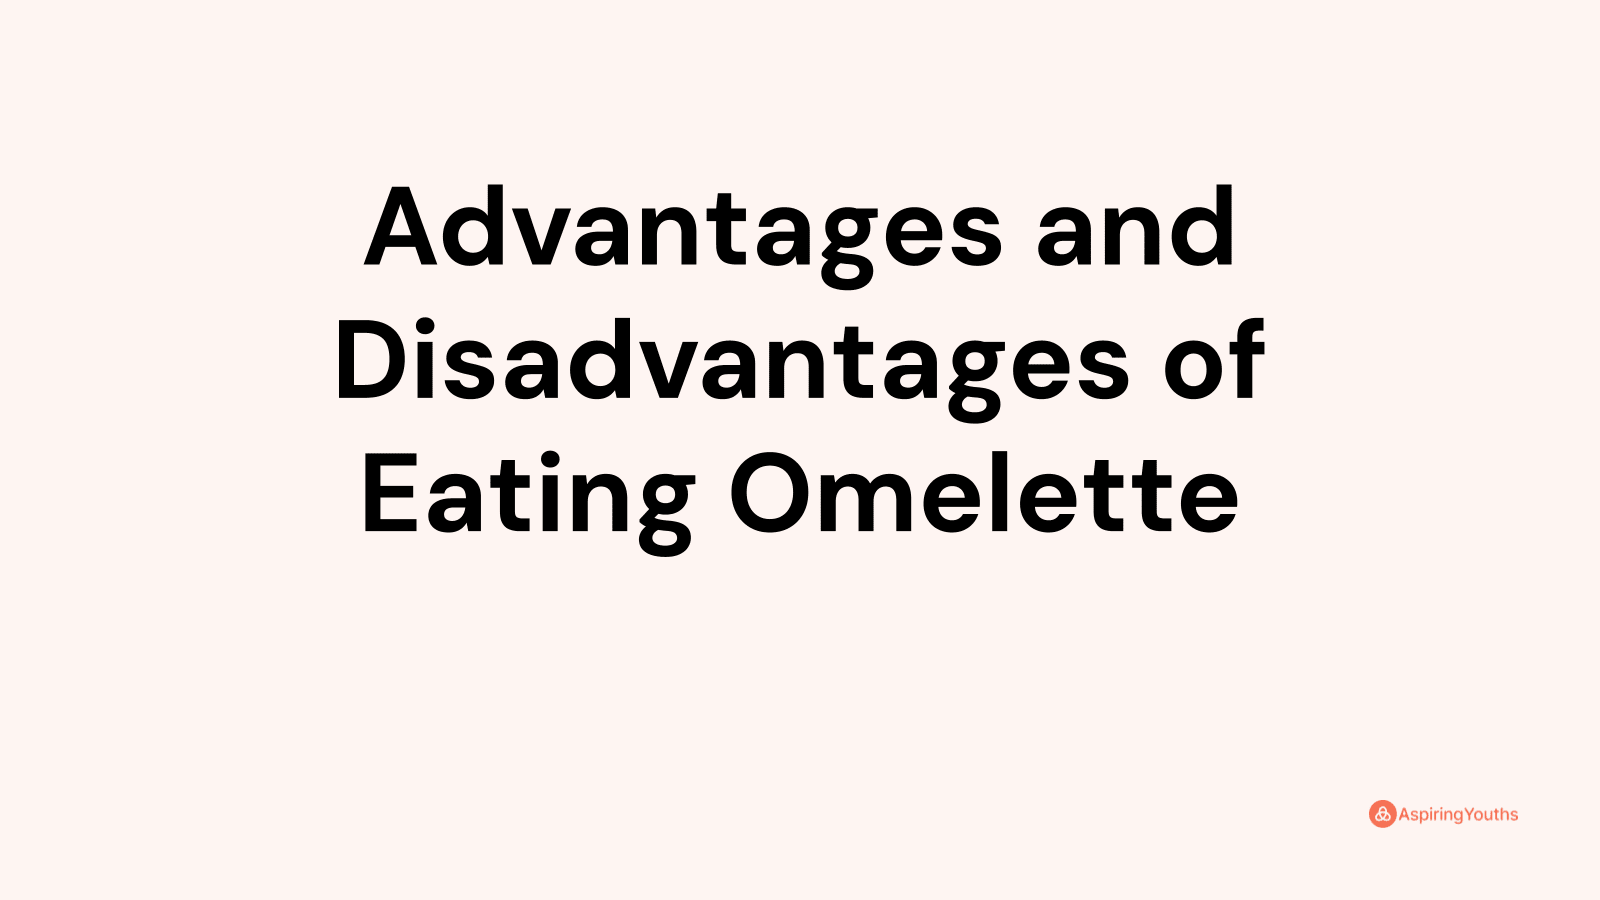 Advantages and disadvantages of Eating Omelette